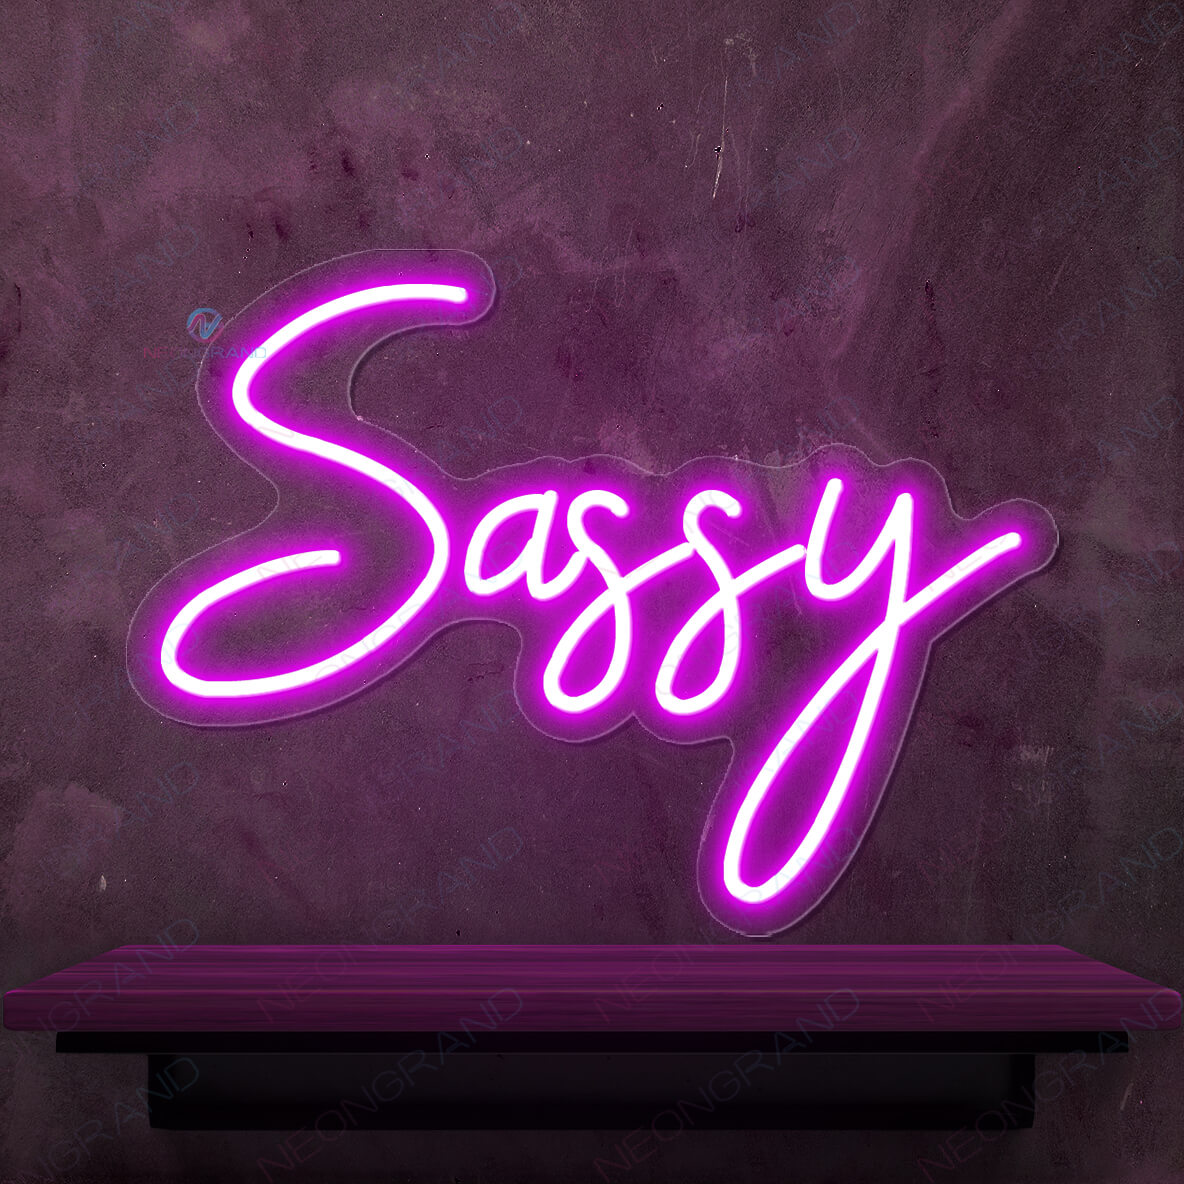 Sassy Neon Sign Stay Sassy Neon Party Led Light purple